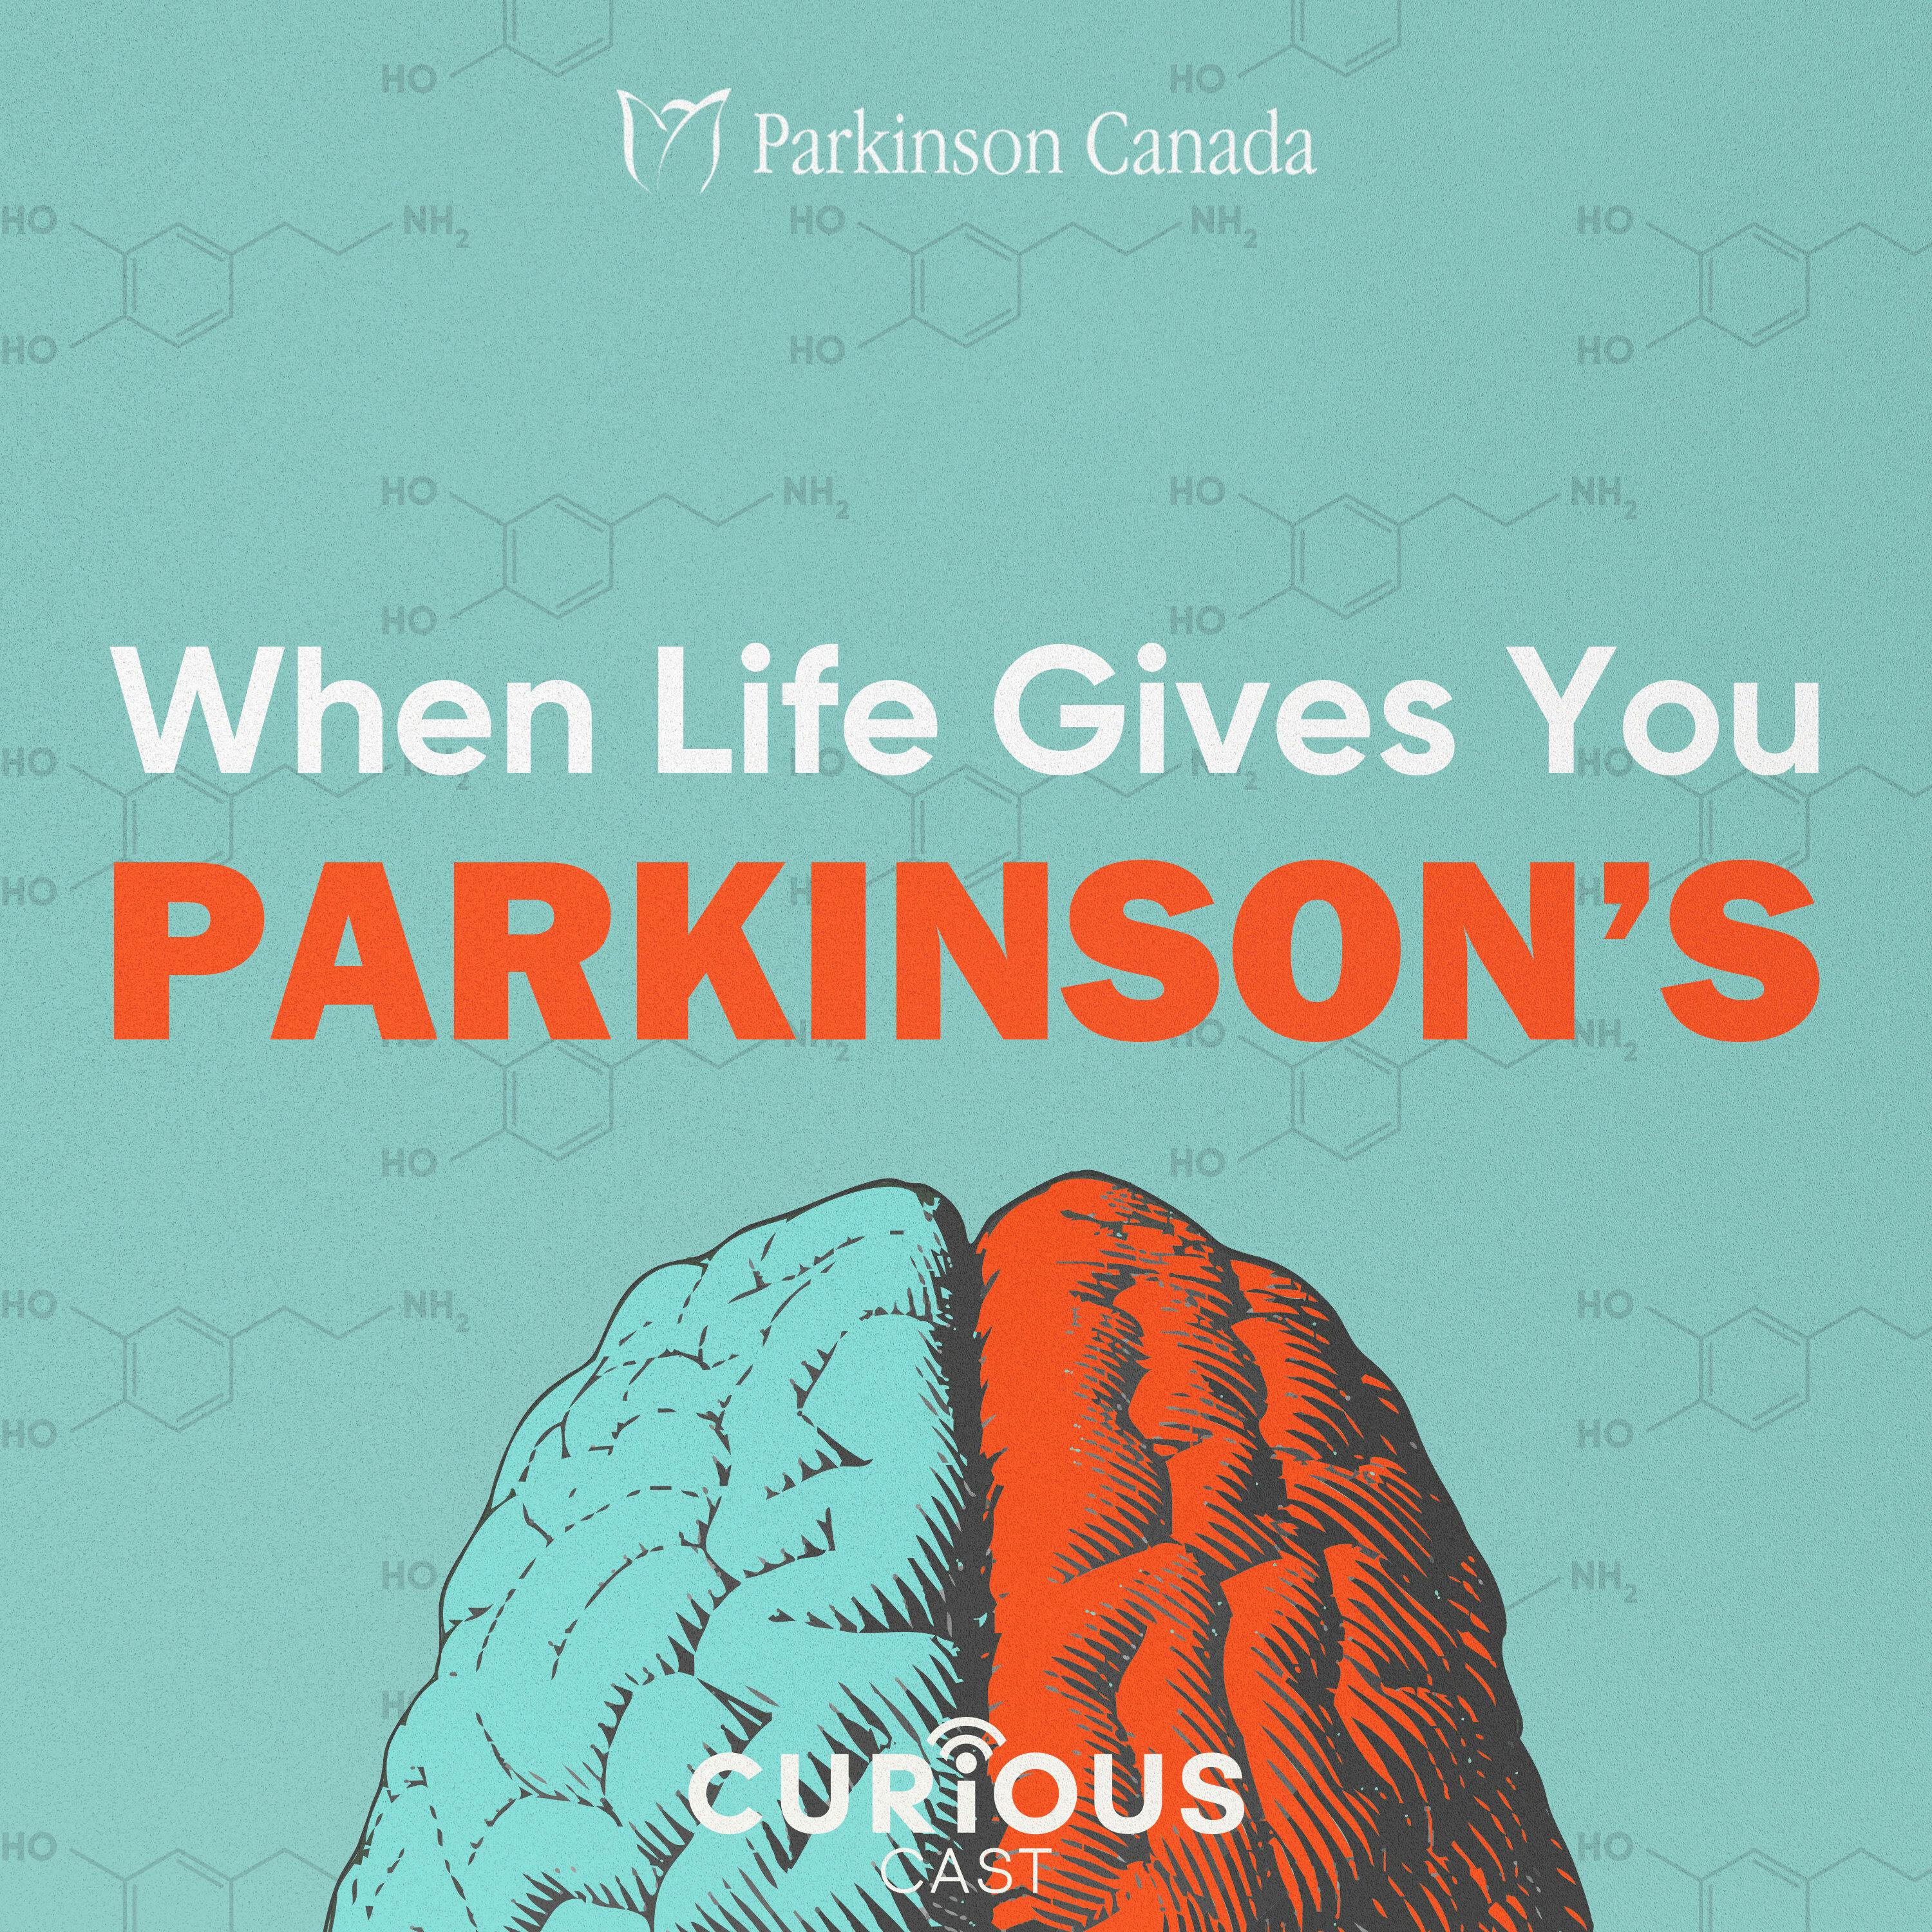 How Writing Can Help People With Parkinson’s